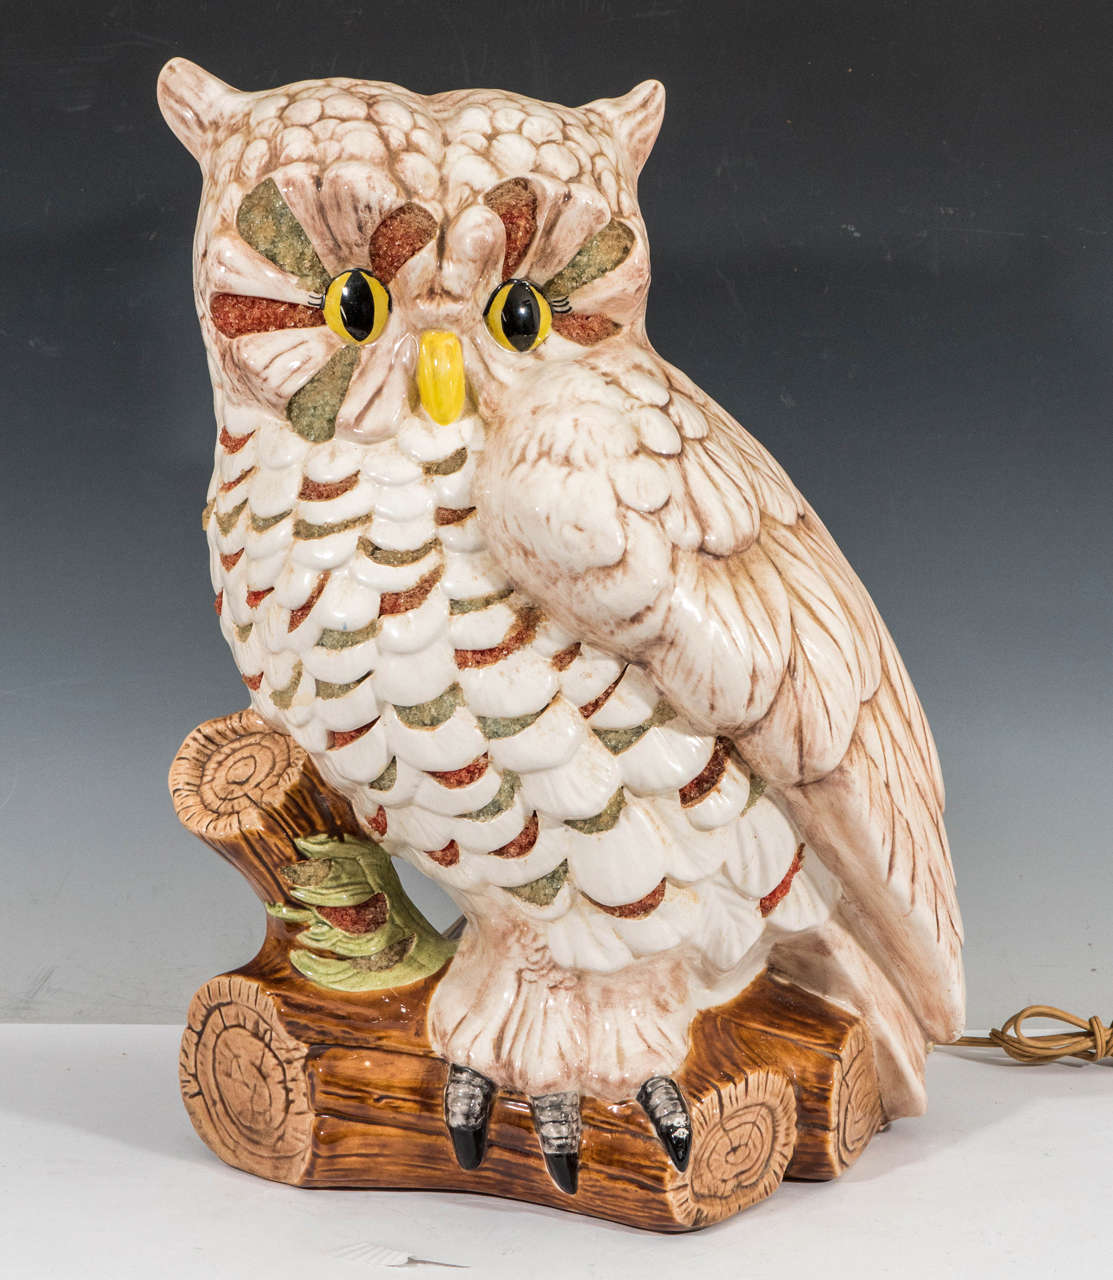 A vintage painted and glazed ceramic lamp, in the form of a highly detailed and colorfully painted owl perched on a log. Whimsical design and illuminating eyes are reminiscent of TV lamps produced circa 1950's by Texans Incorporated. Wiring and